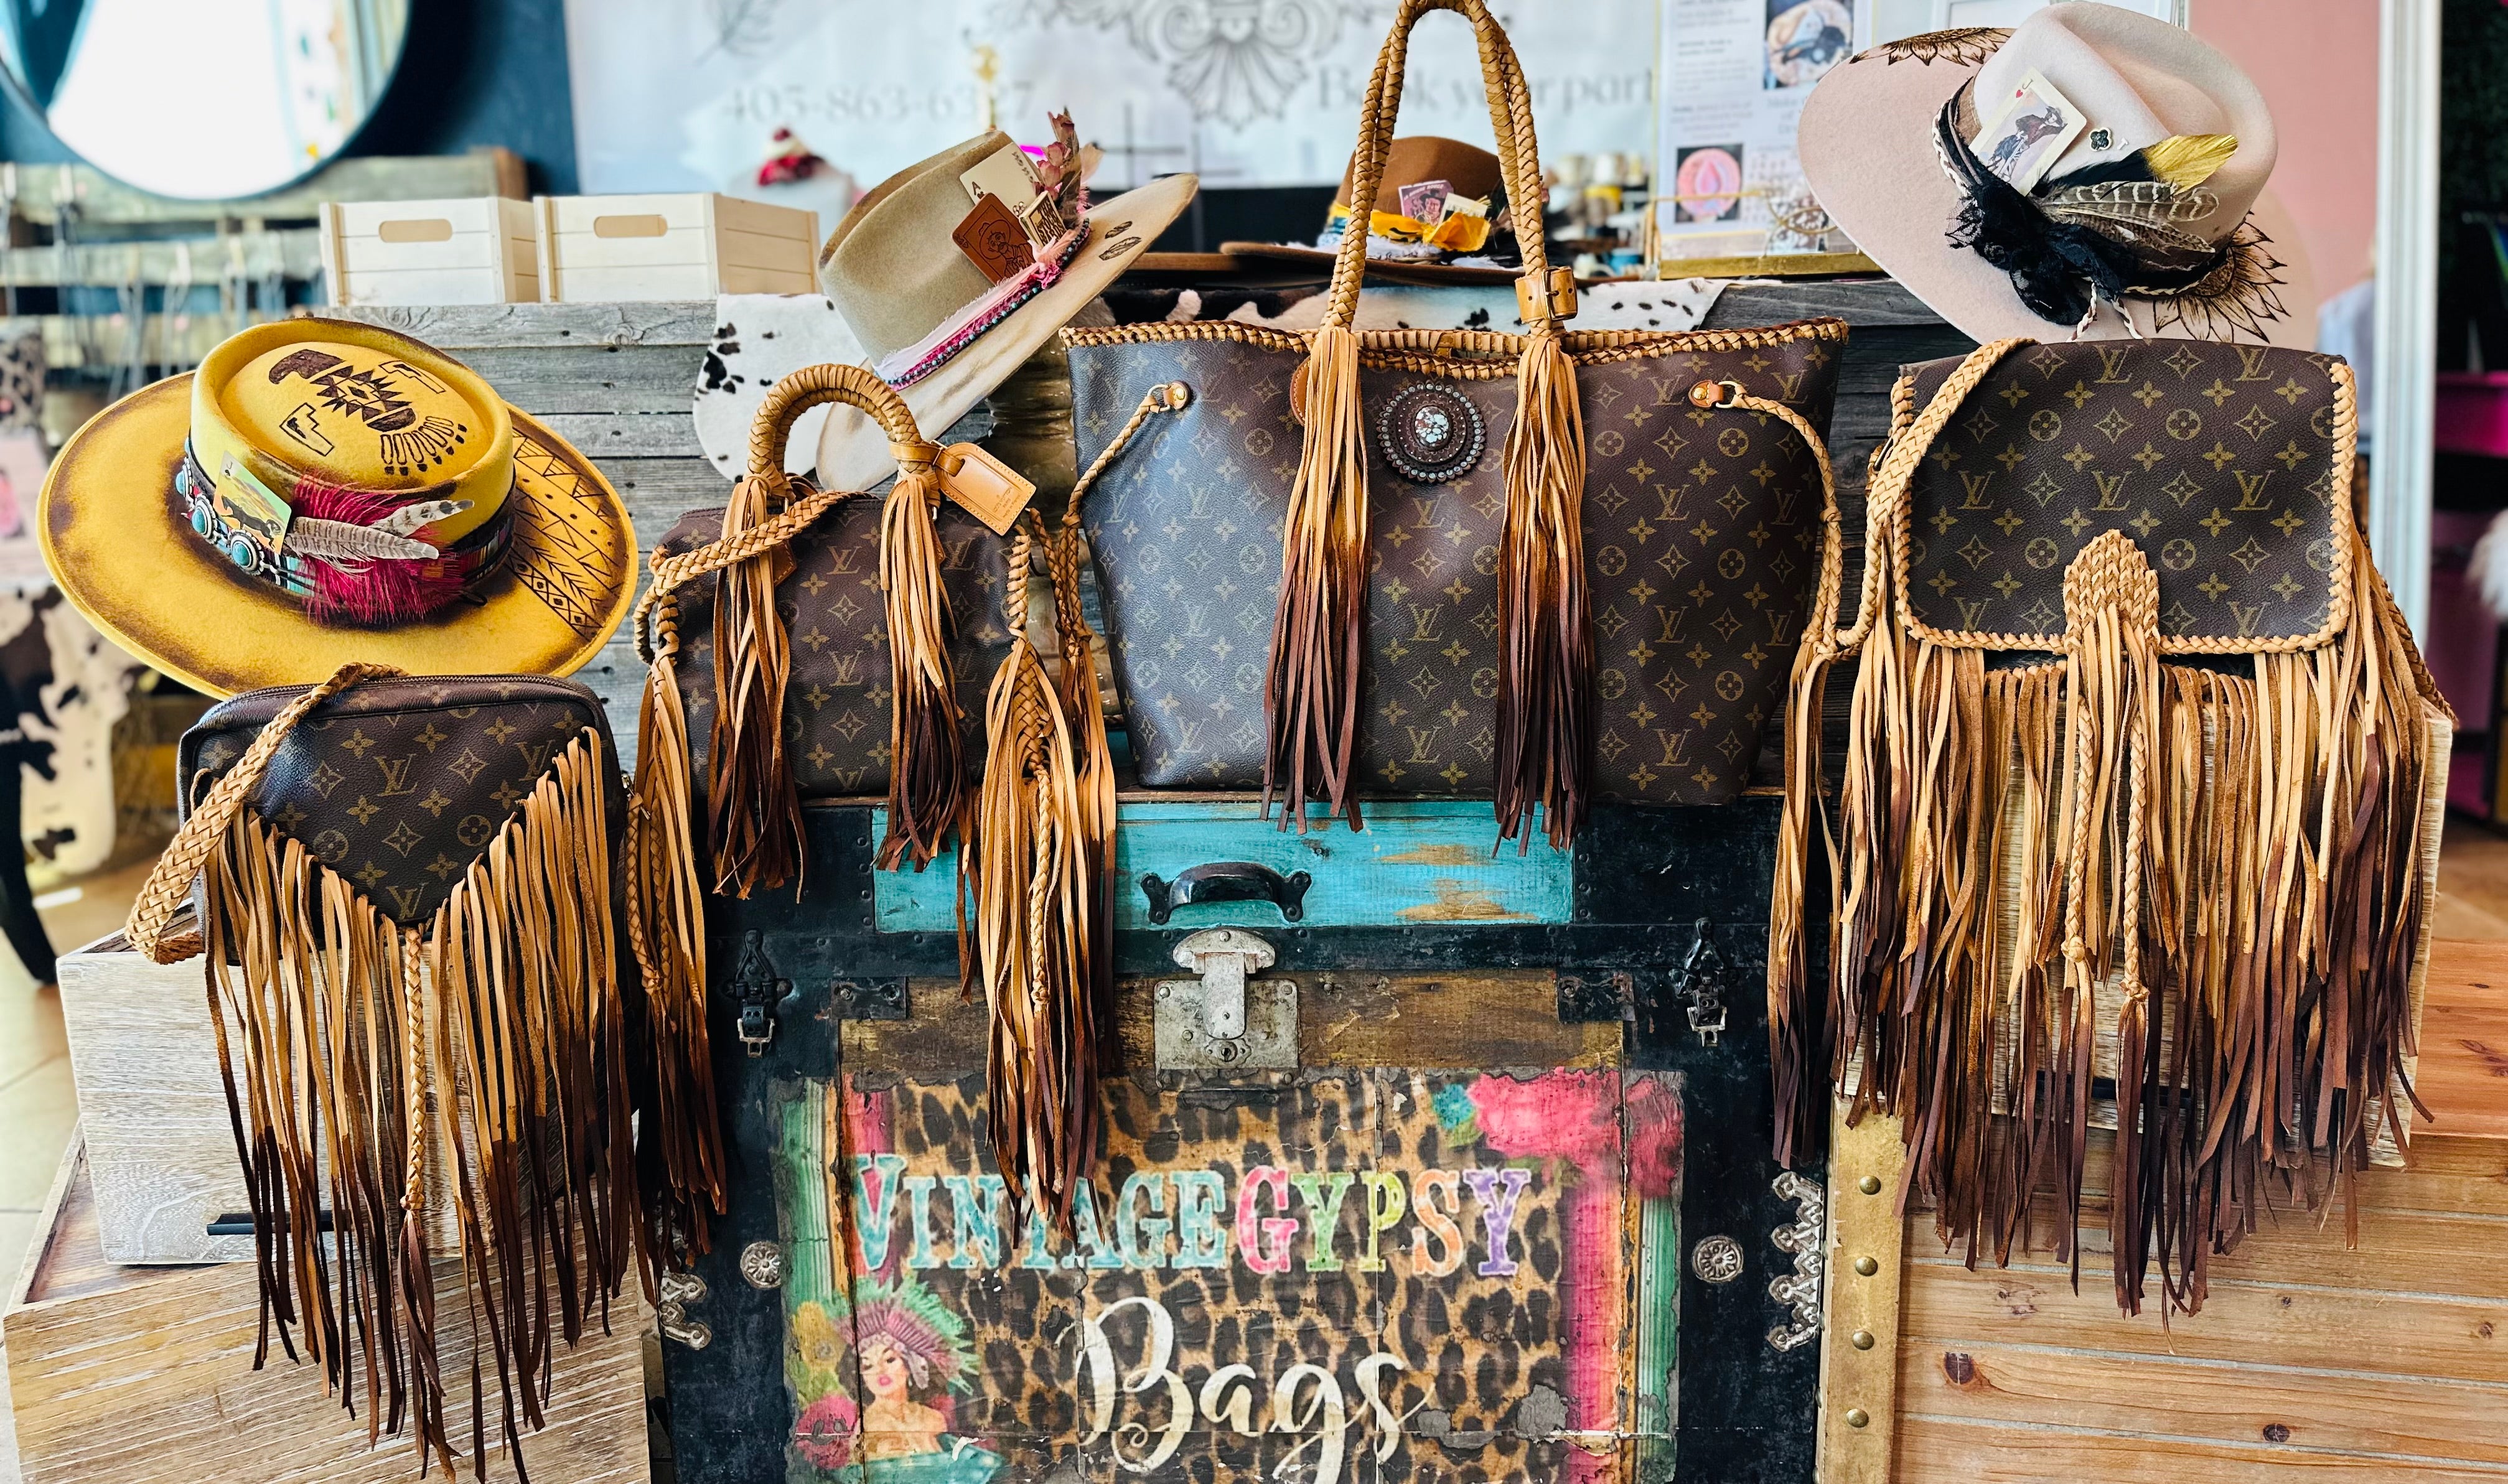 LIMITED EDITION Dallas MM Pouch! – VintageGypsy Bags & Boutique